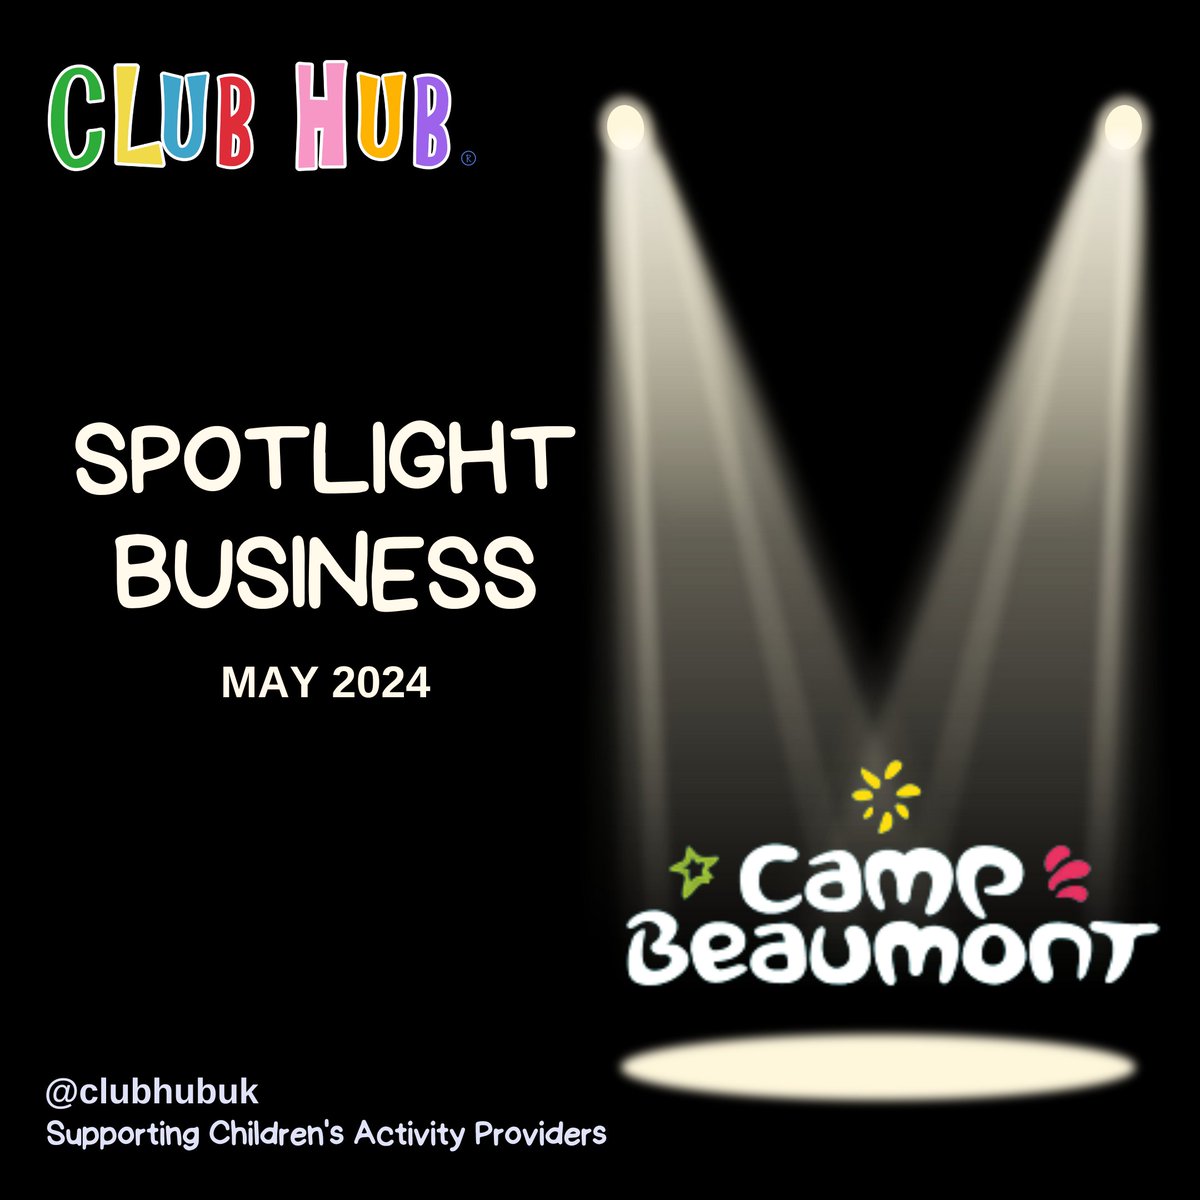 Our Spotlight Business for 2024 is Camp Beaumont! Book Day Camps or Epic Weeks this May Half Term and Summer! campbeaumont.co.uk #ClubHubMember #CampBeaumont #LondonKids #HolidayCamps #LondonKidsActivities